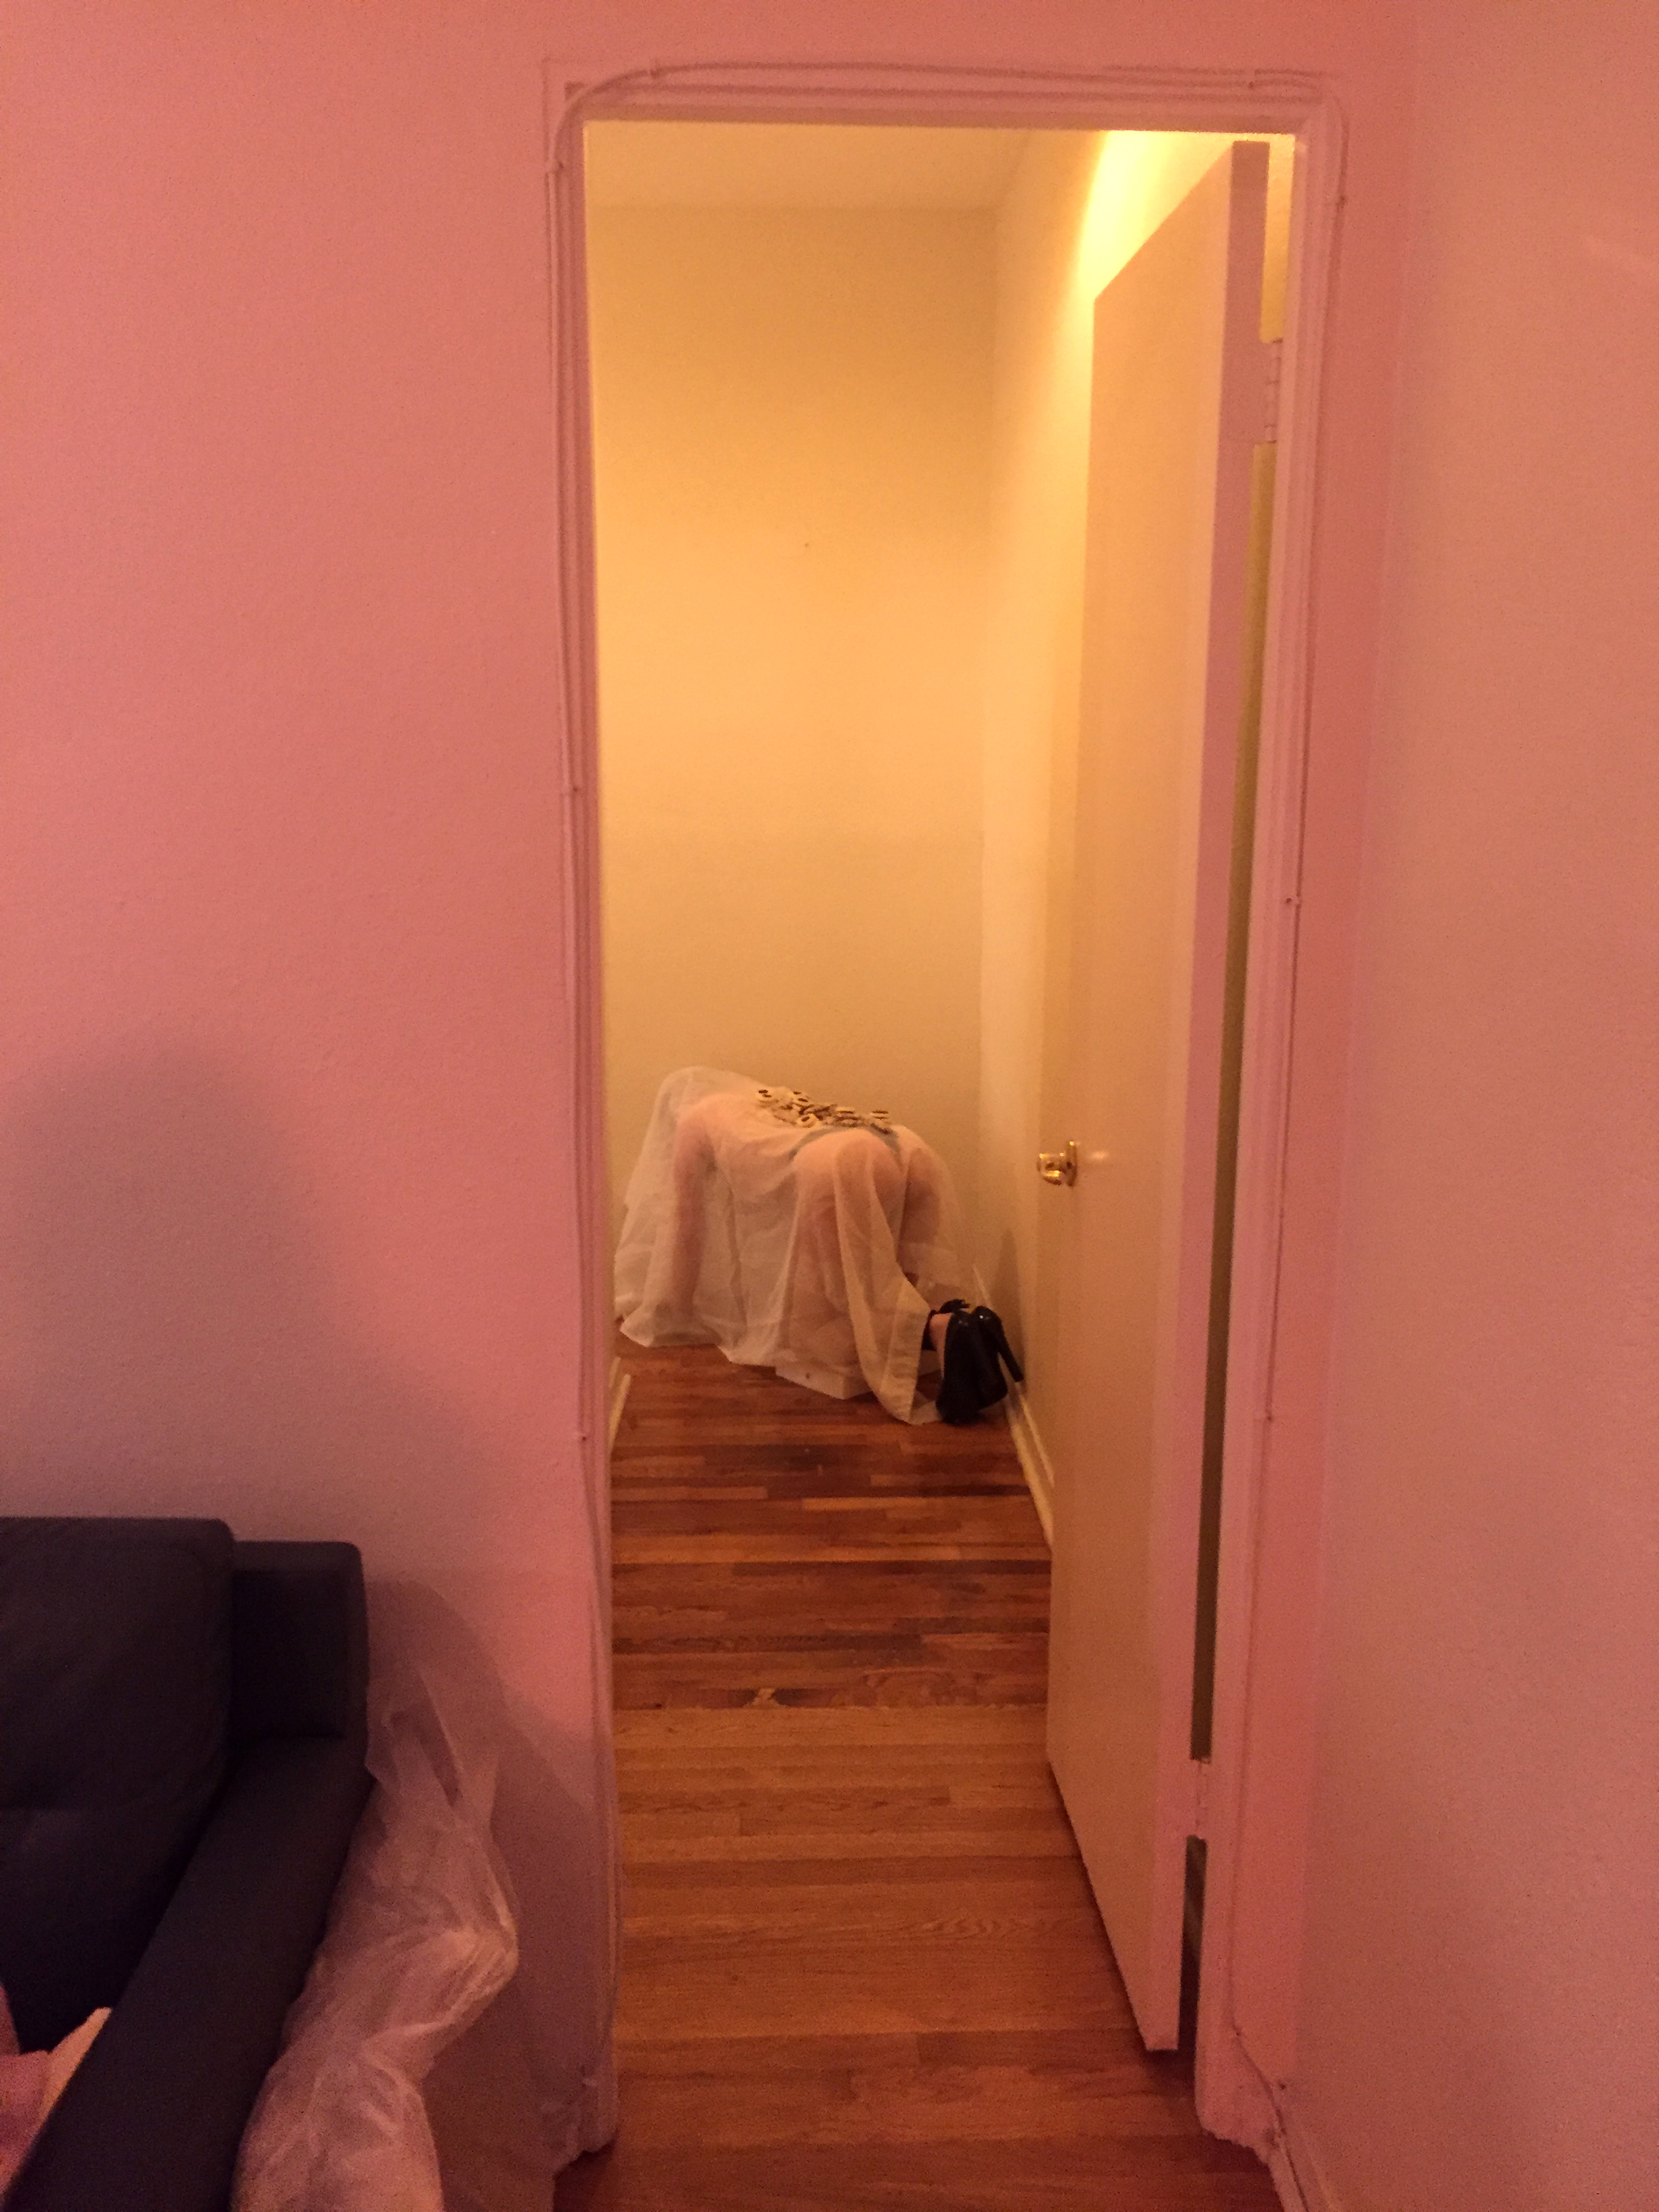 A girl on all fours with a sheer sheet over her in a narrow hallway in warm light